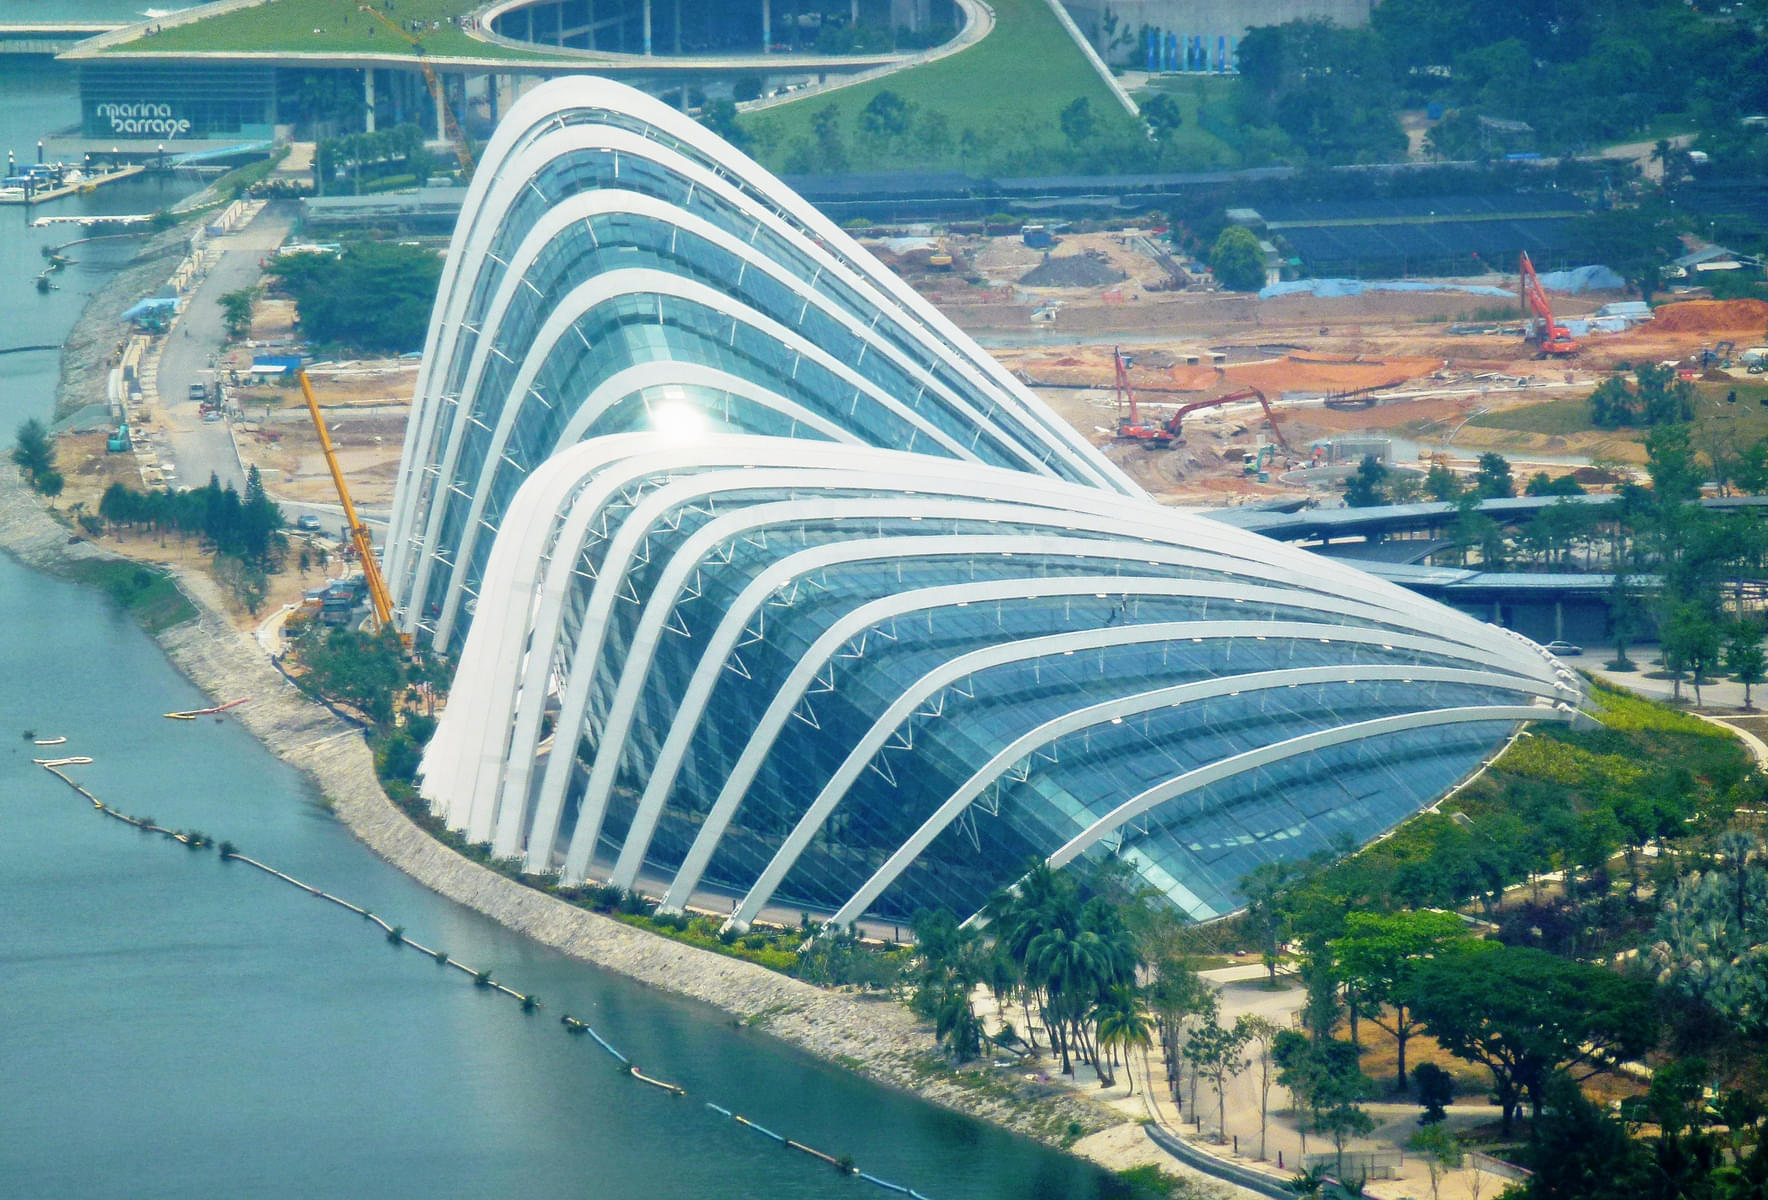 Look at the gardens by the bay